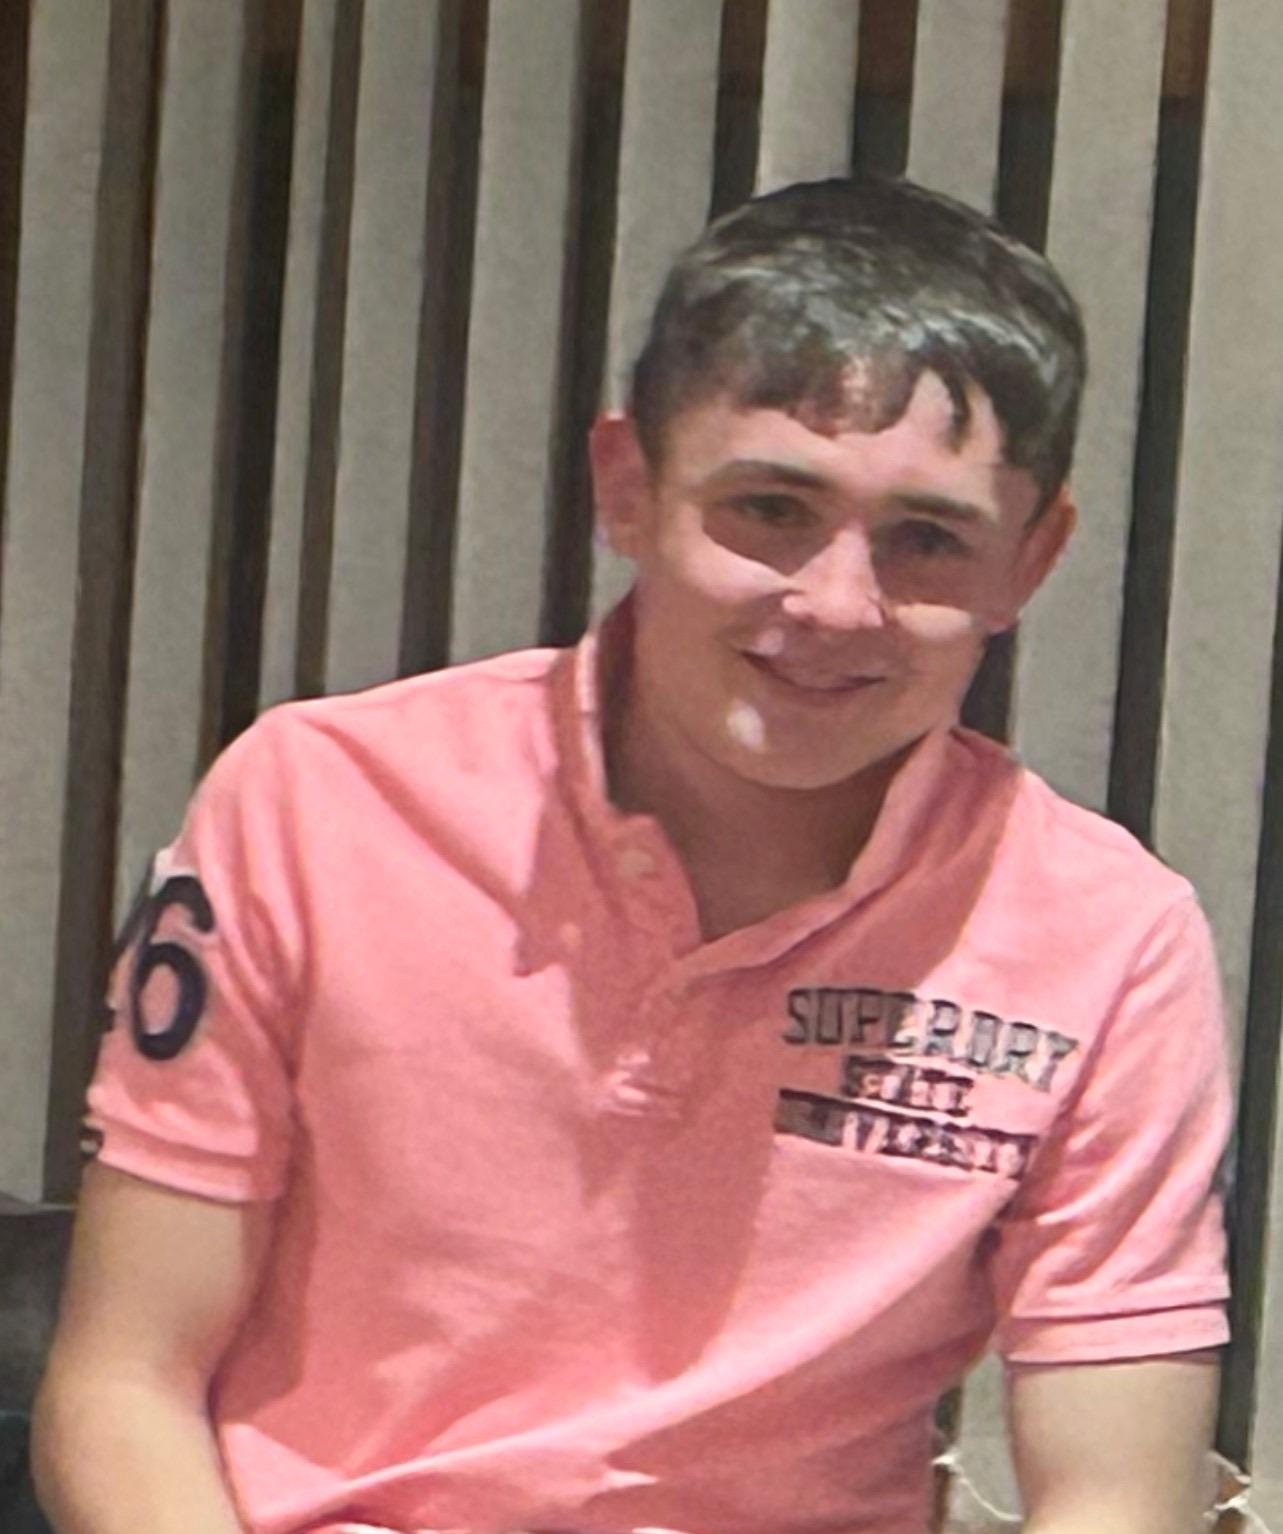 Funeral details released for tragic 18-year-old Cathal McCrory who was passenger in single vehicle collision